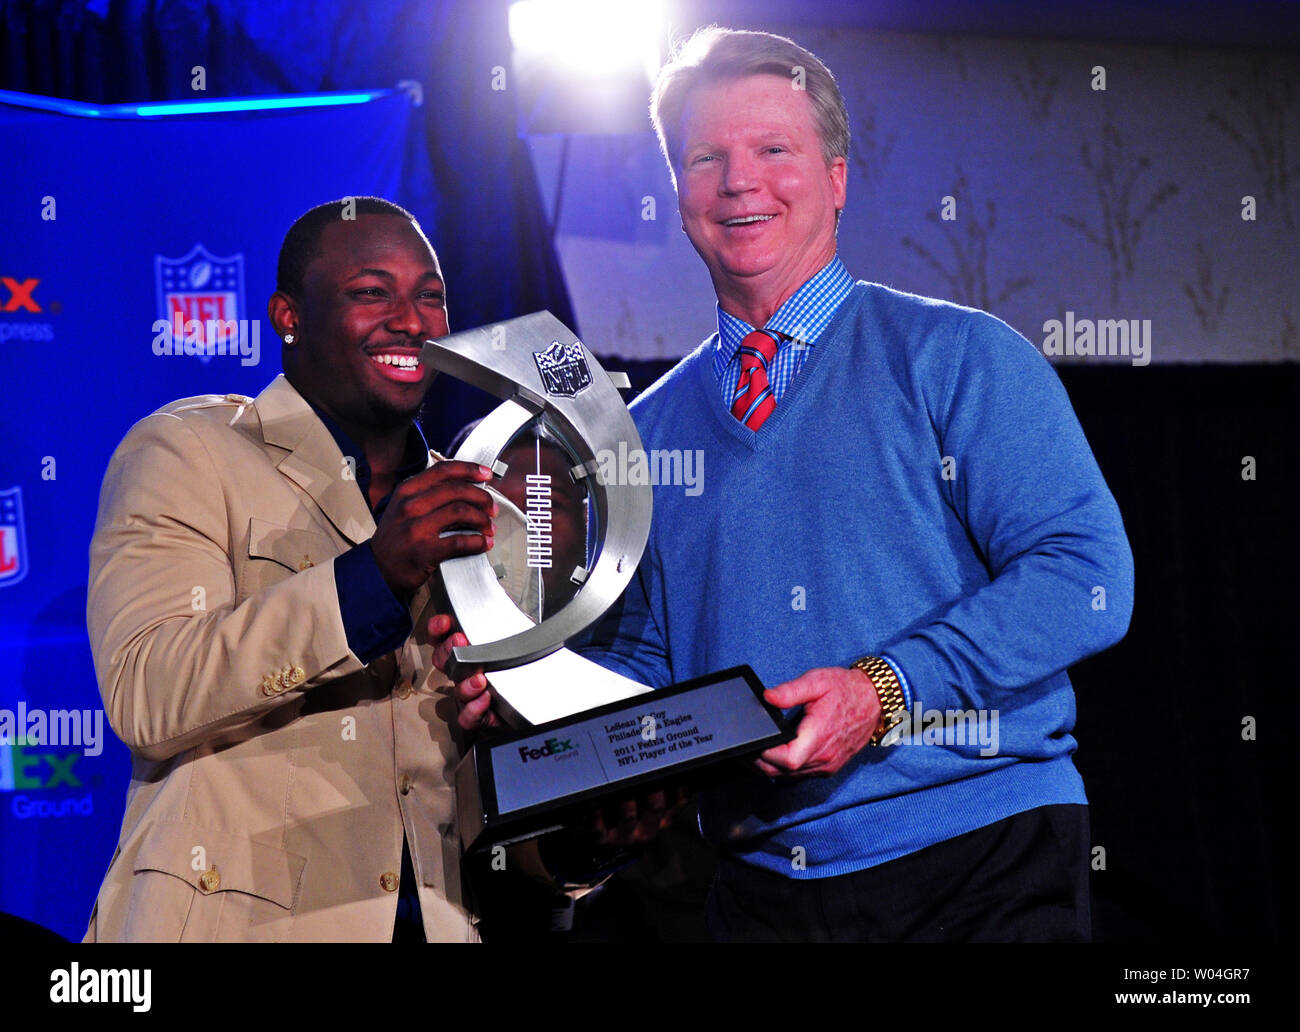 Philadelphia Eagles running back LeSean McCoy receives the FedEx 2011 Ground NFL Player of the Year award from commentator Phil Simms during a ceremony in Indianapolis during Super Bowl week on February 1, 2012, 2012.  UPI/Kevin Dietsch Stock Photo